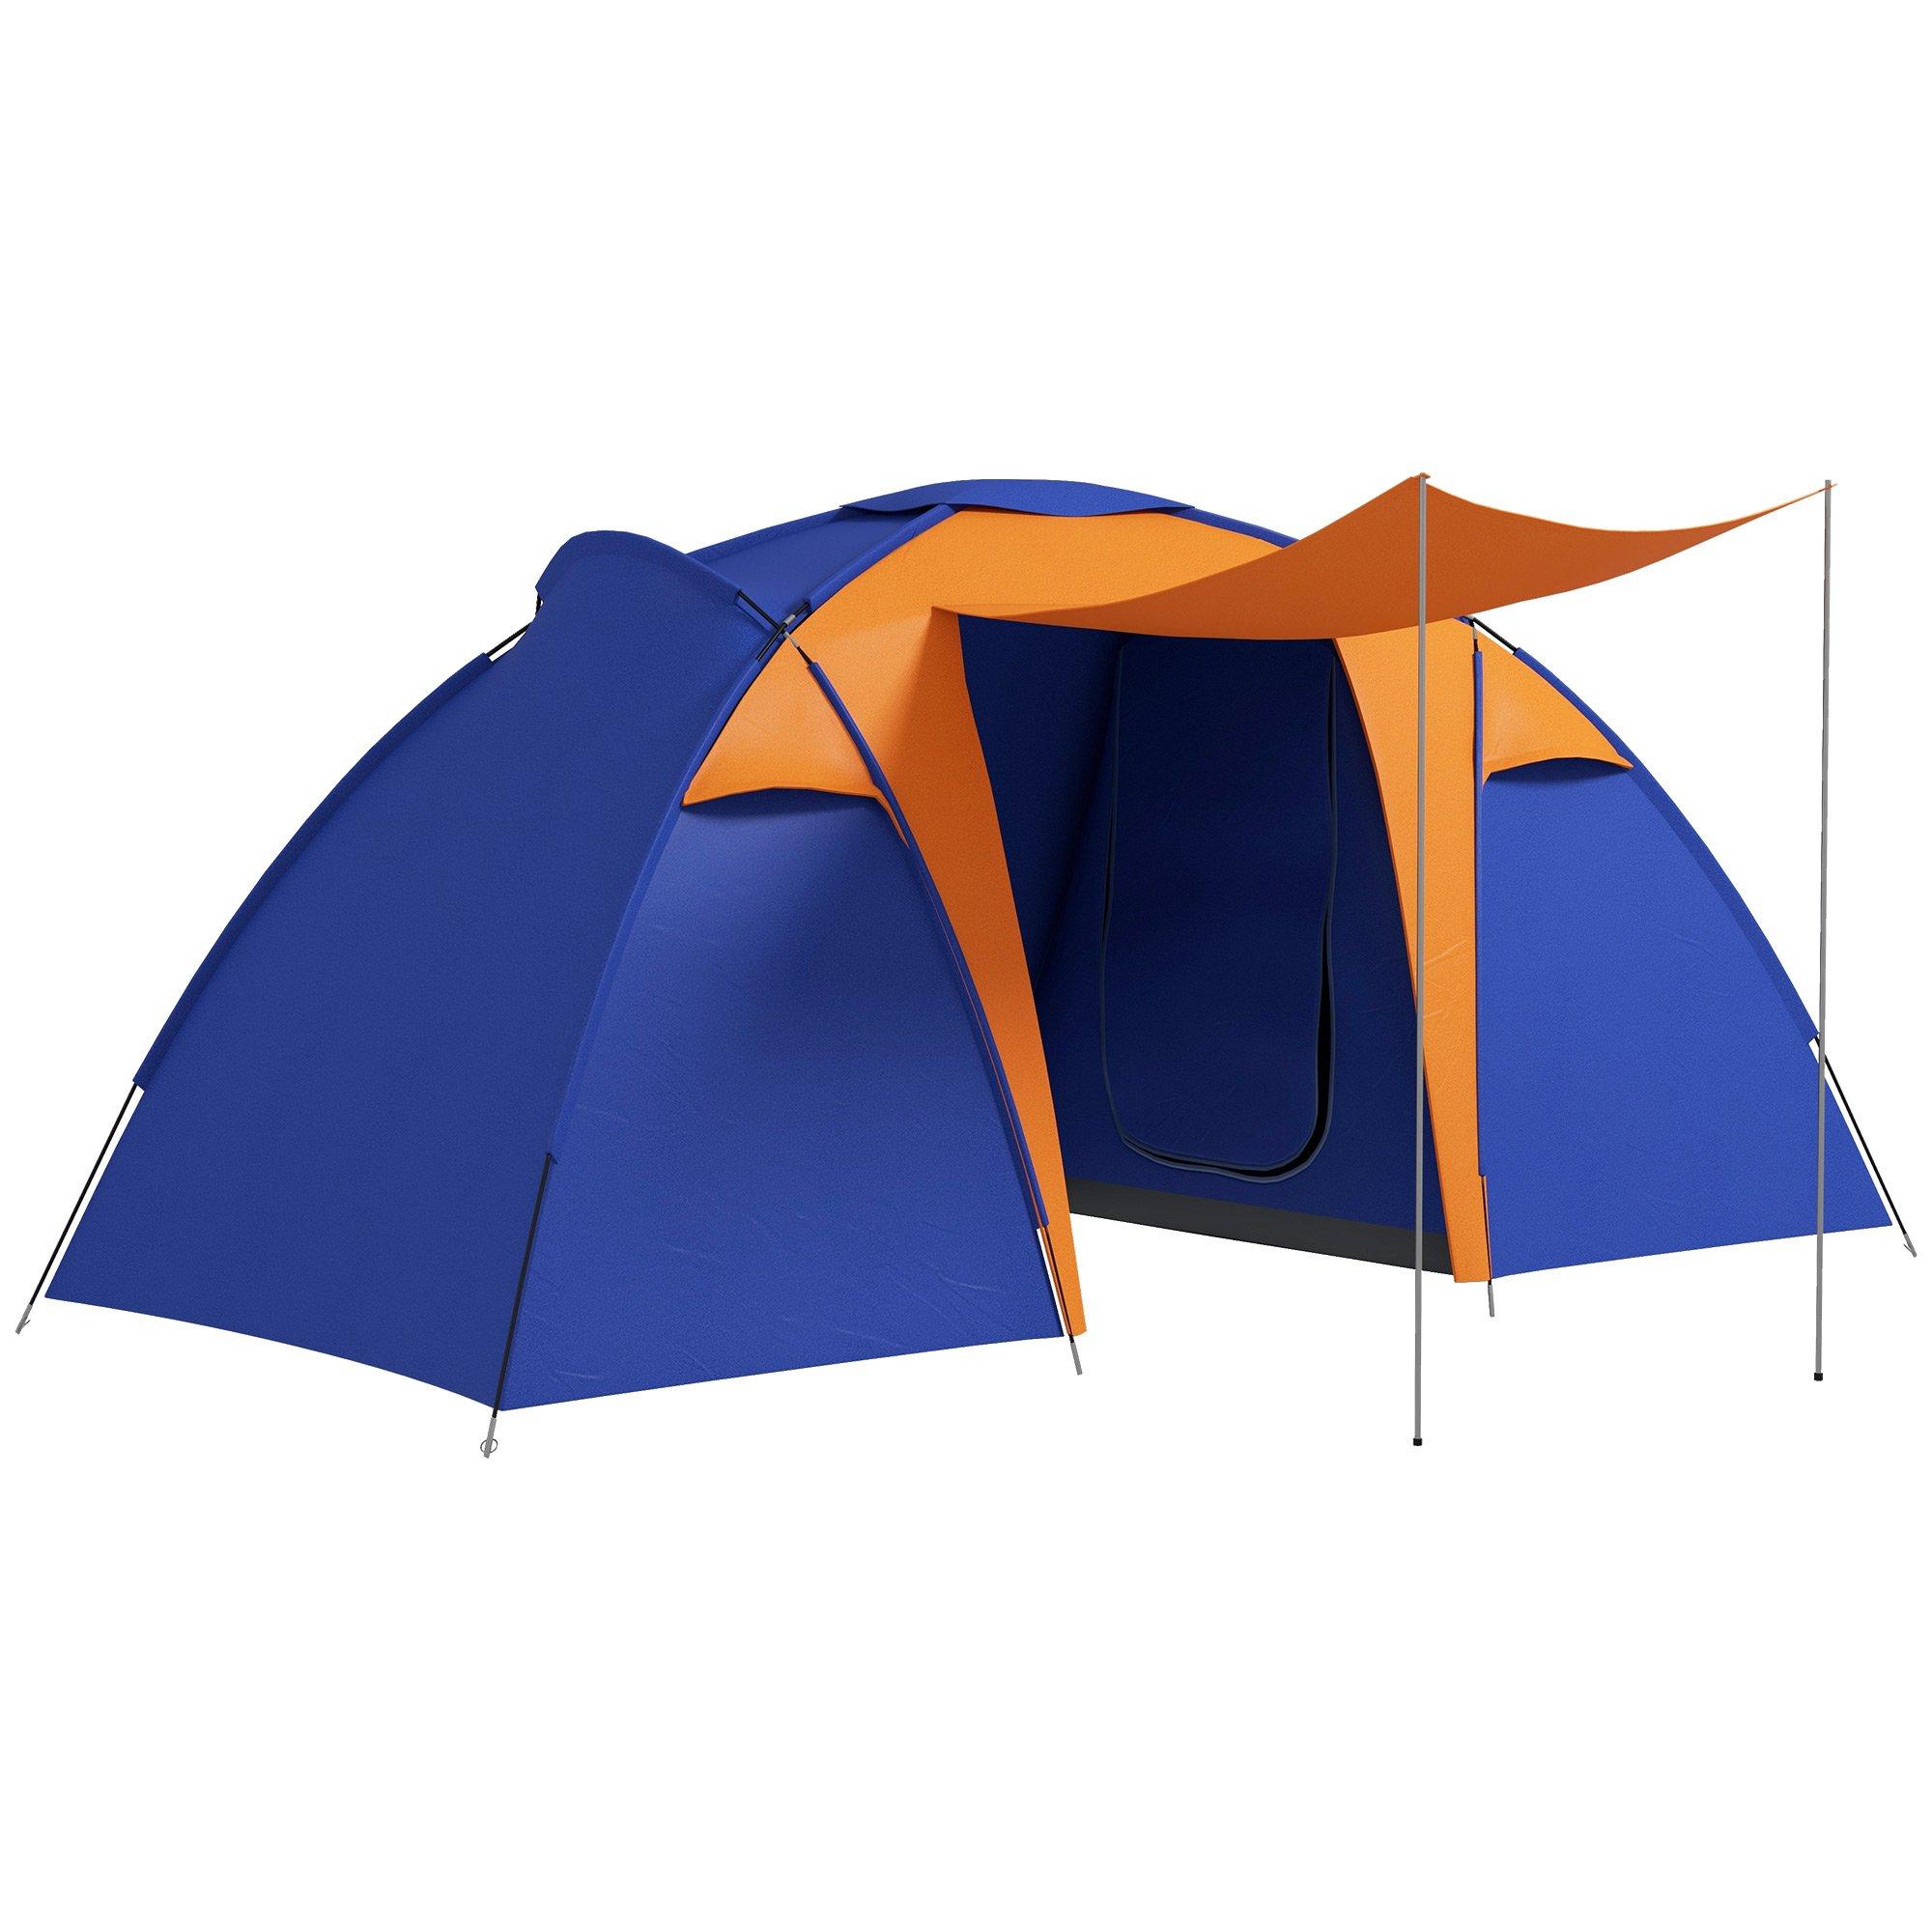 Large Camping Tent with 2 Bedroom, Living Area and Awning for 4-6 Person